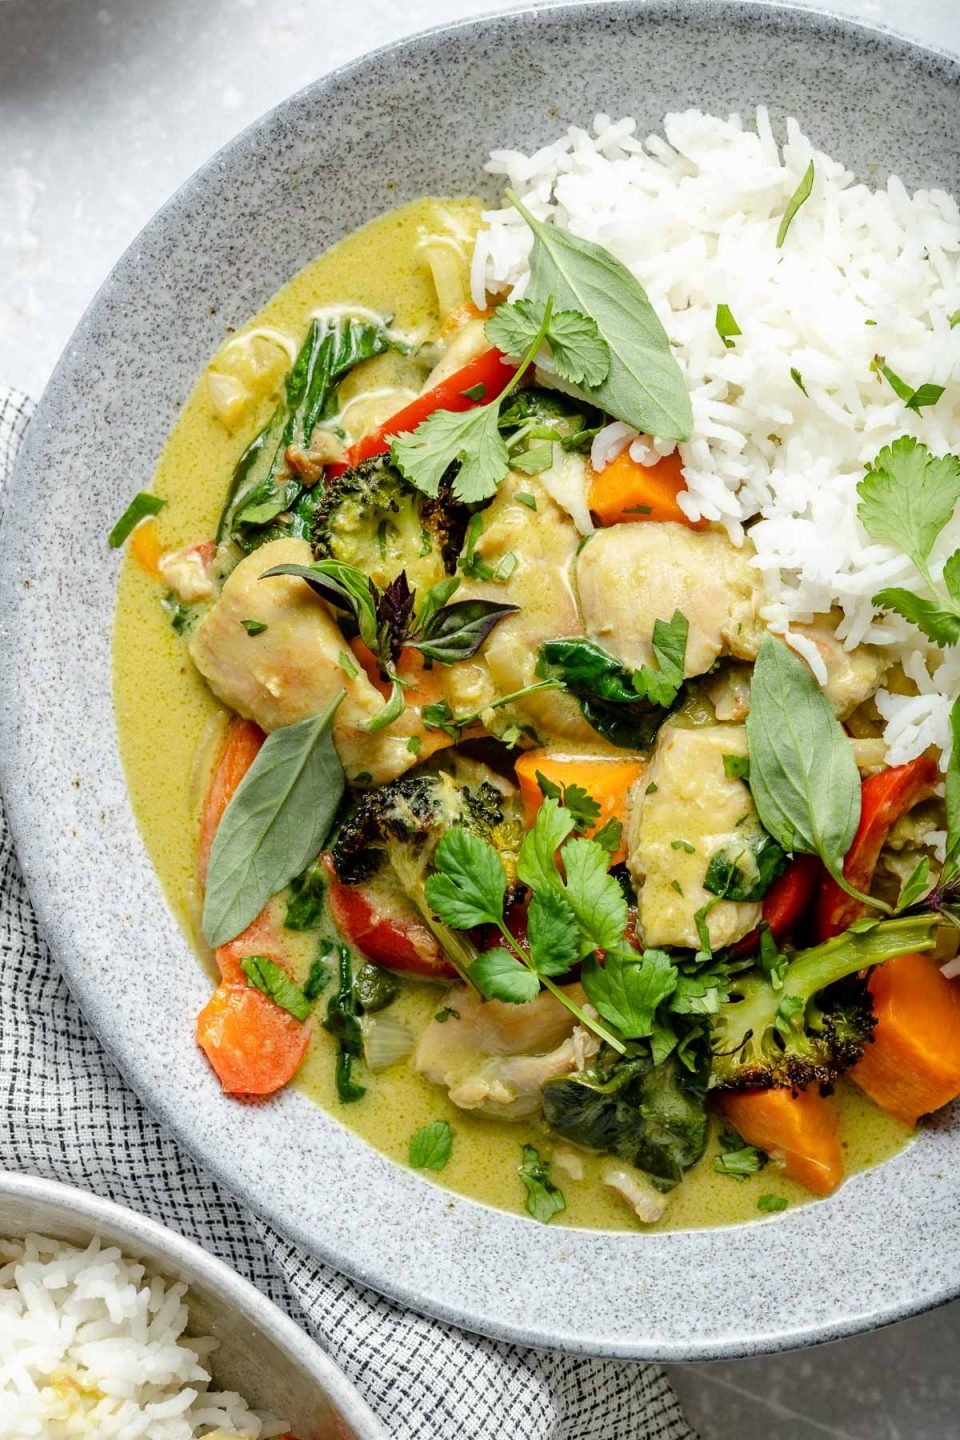 How To Make Chicken Quinoa Coconut Curry Bowl? 